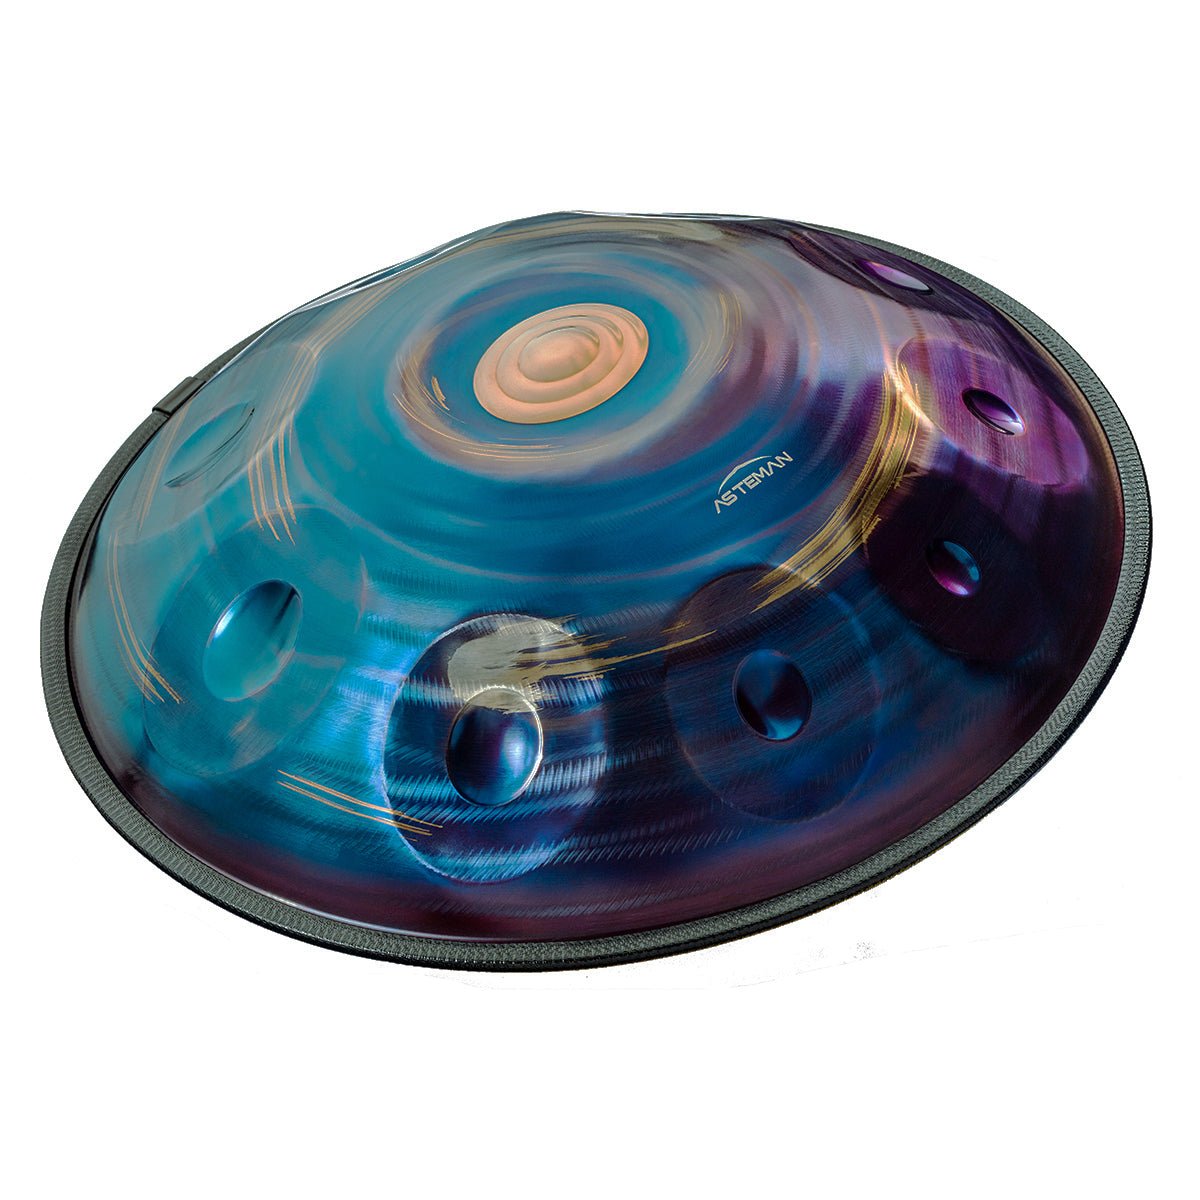 <font color="#B0171F">New </font> AS TEMAN Handpan Meteor 10 Notes D Minor Scale Blue Purple hangdrum with gift set - AS TEMAN